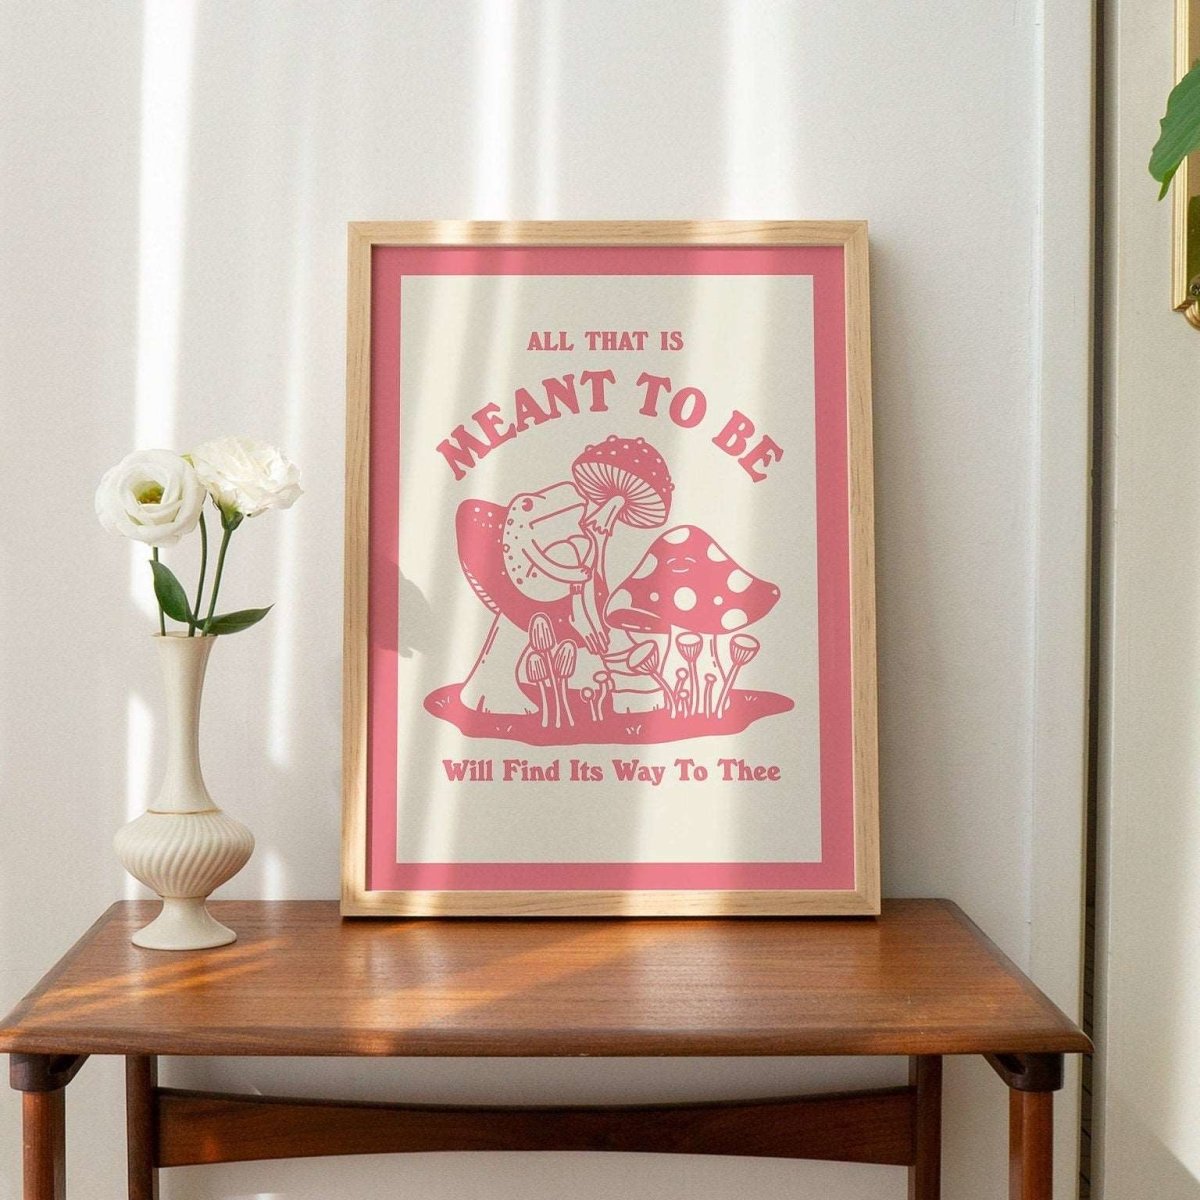 'All That Is Meant To Be' Print - Art Prints - Kinder Planet Company